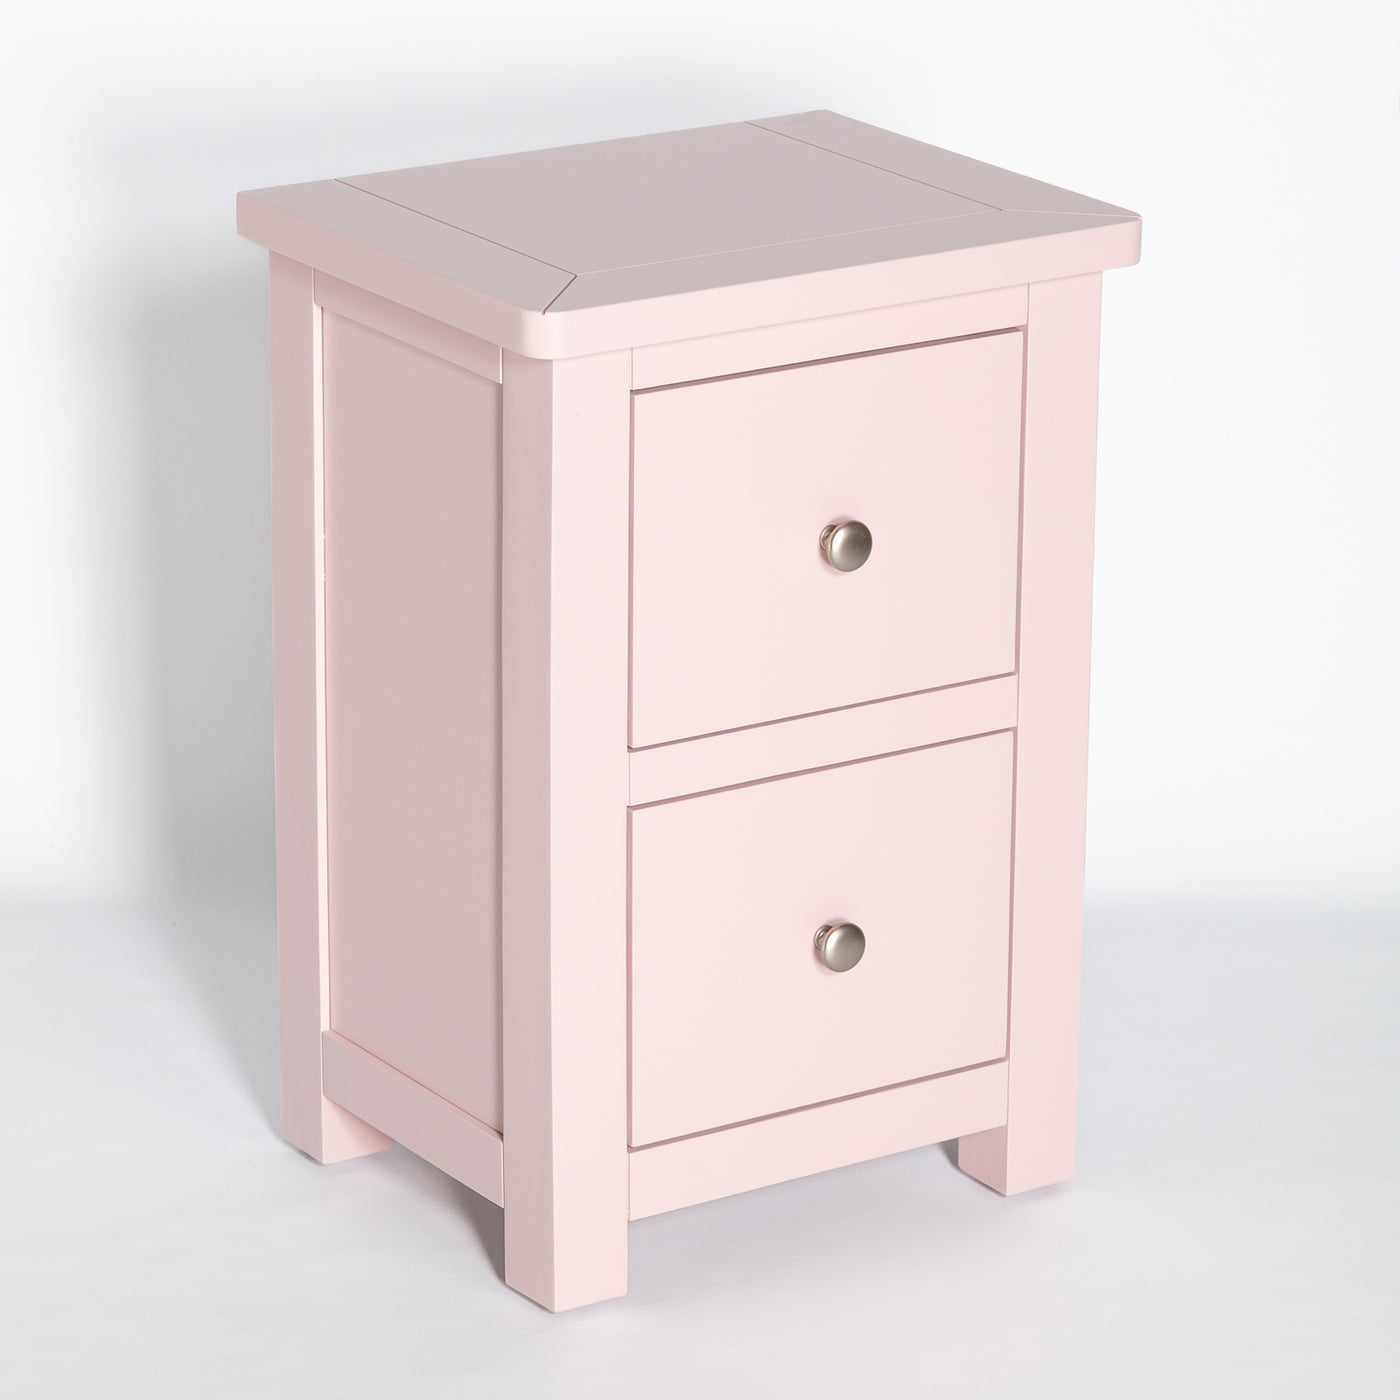 P 8002 Pink Bedside Table Cabinet Solid Wood Fully Assembled 2drw Simply Bedsides 1 ?v=1690303981&width=1400